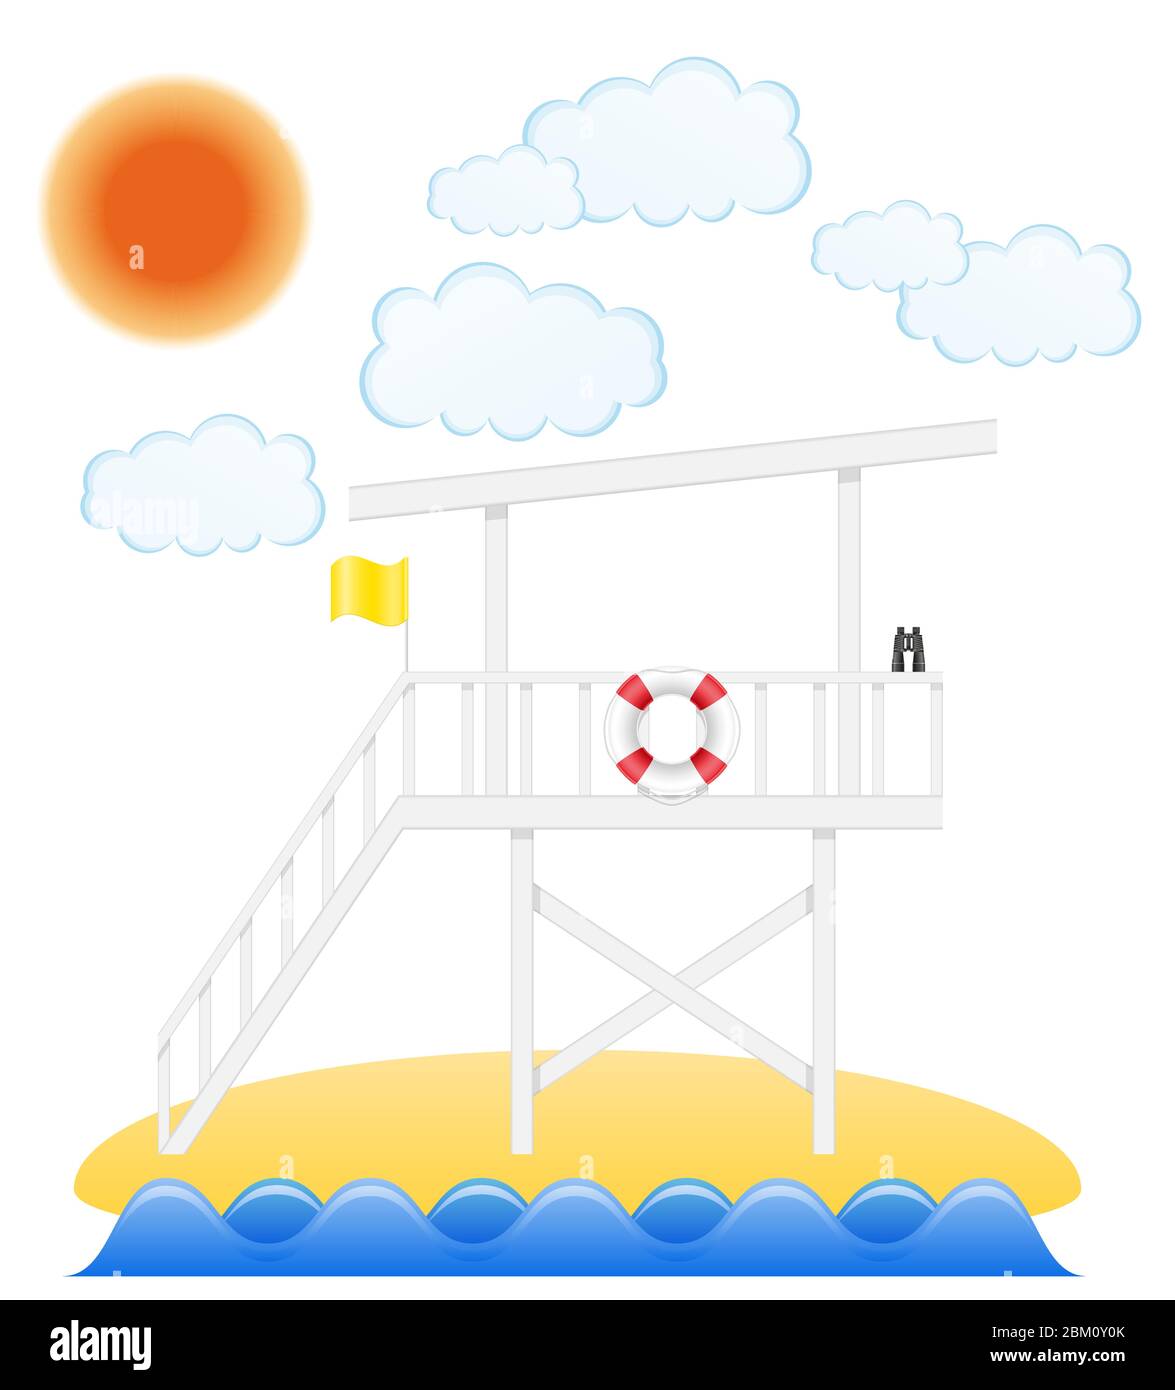 beach lifeguard tower to save drowning people vector illustration isolated on white background Stock Vector